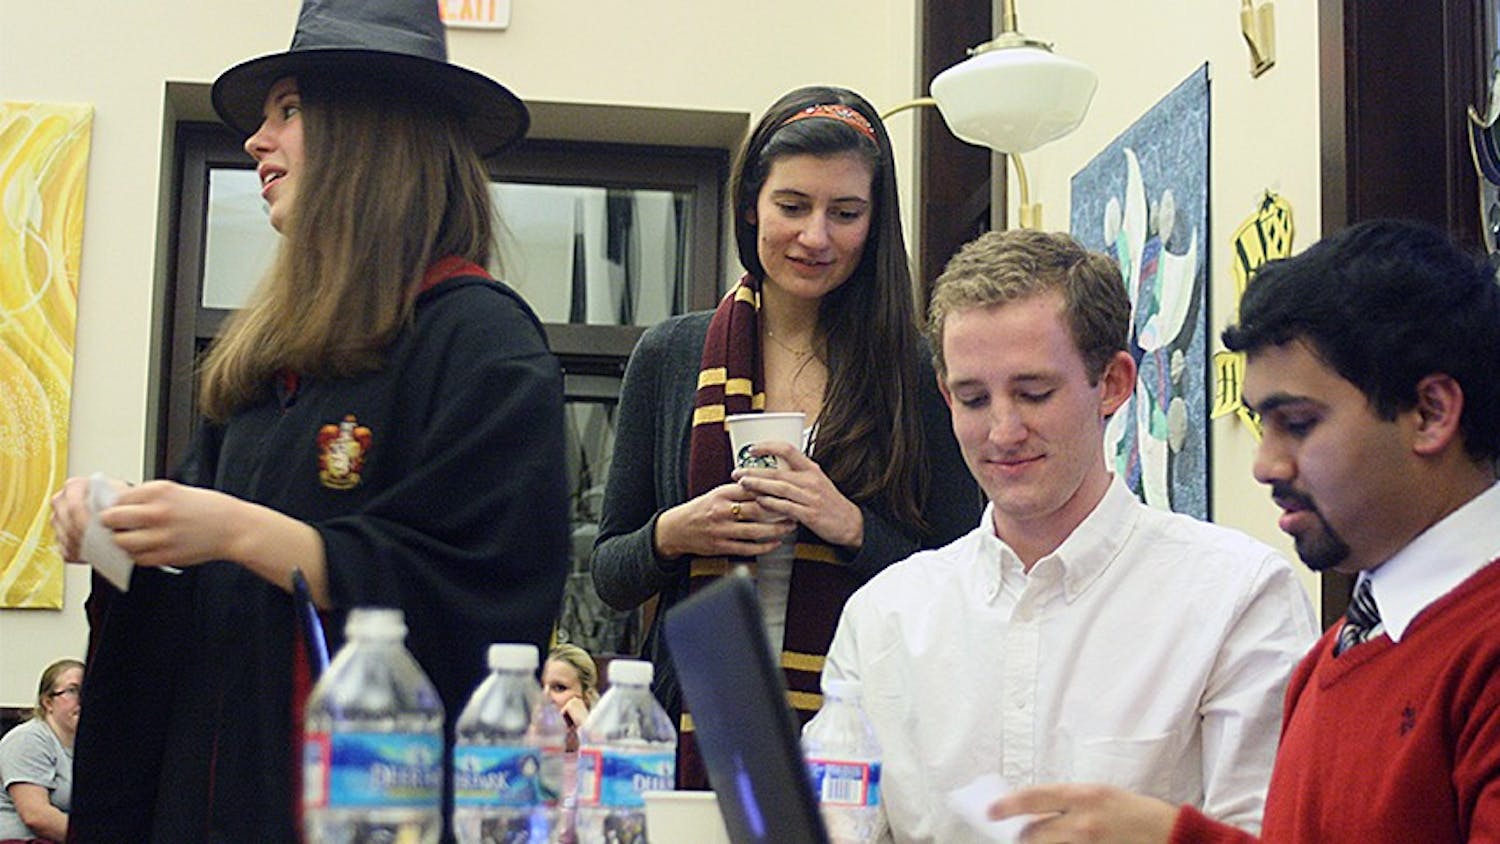 To support the on campus group Project Literacy, students held a Harry Potter trivia contest. 